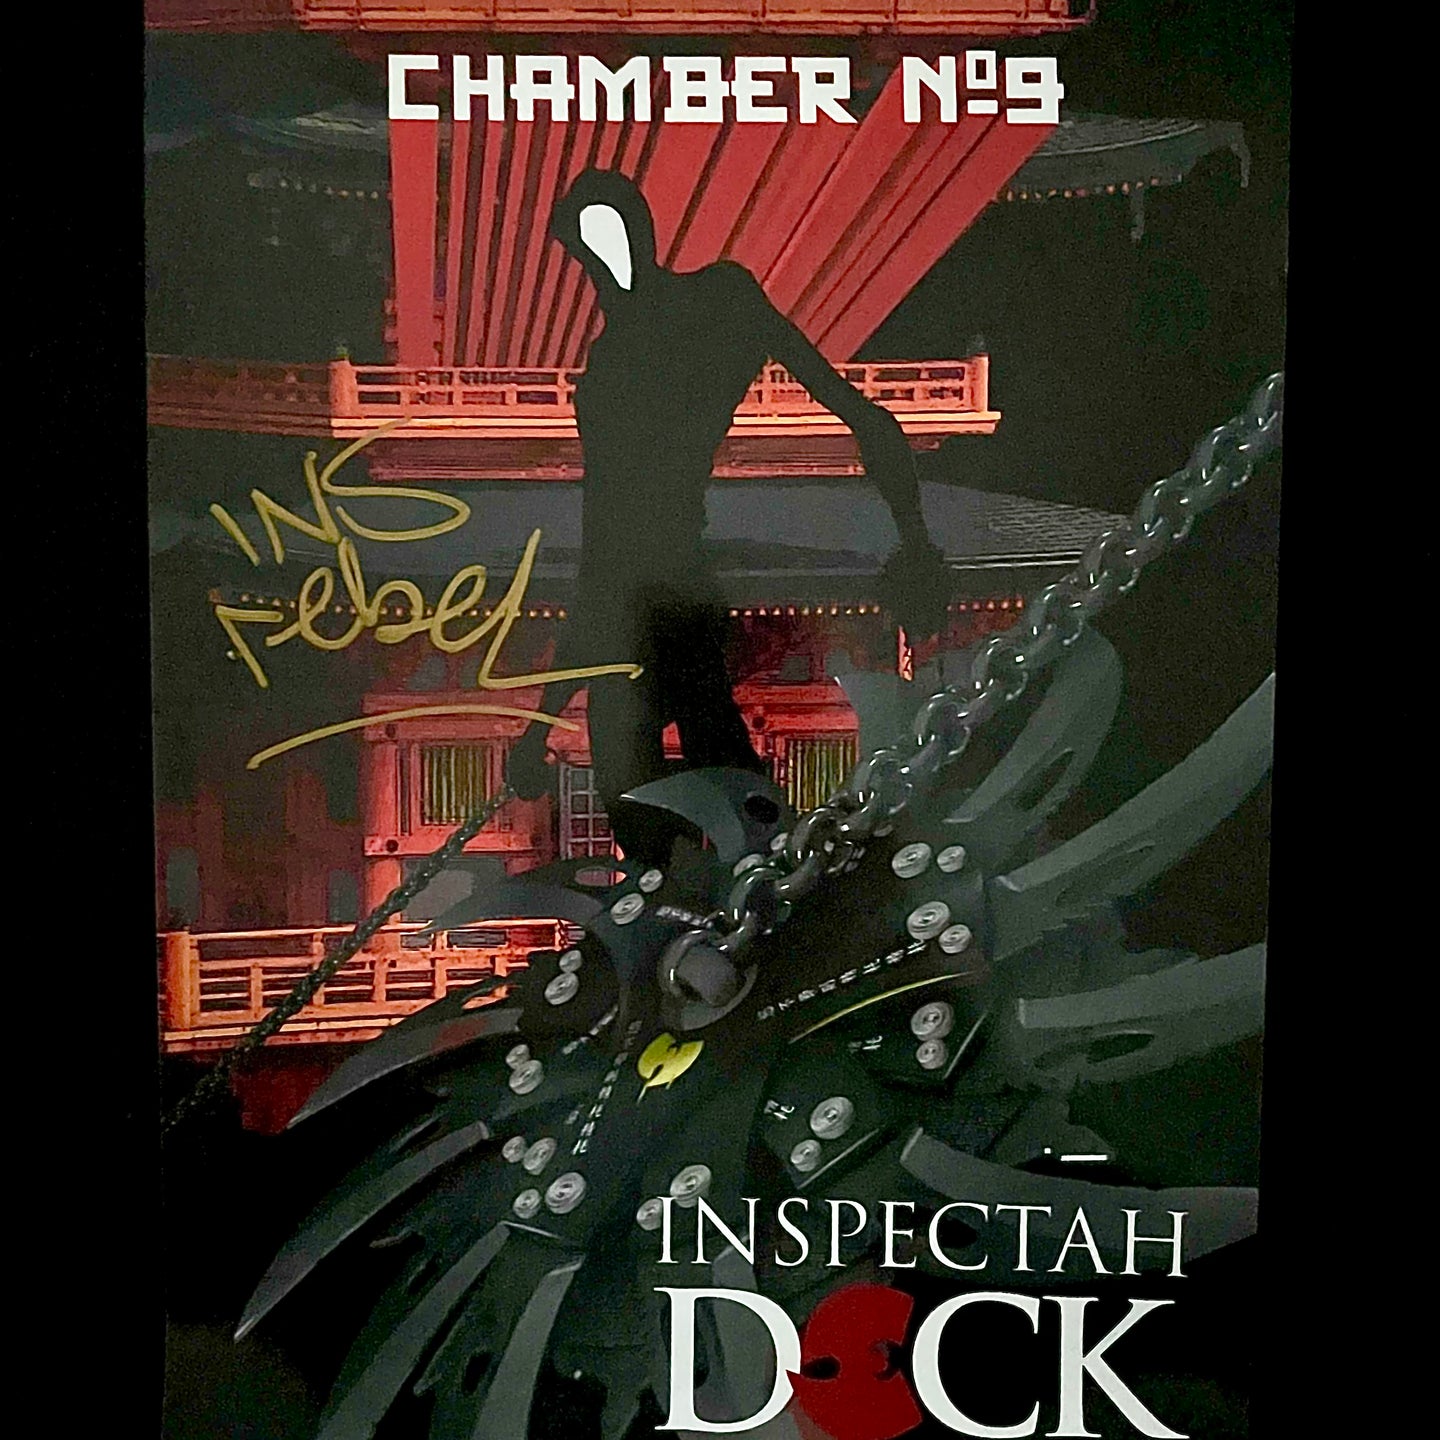 LIMITED EDITION* CHAMBER NO. 9 AUTOGRAPHED POSTER